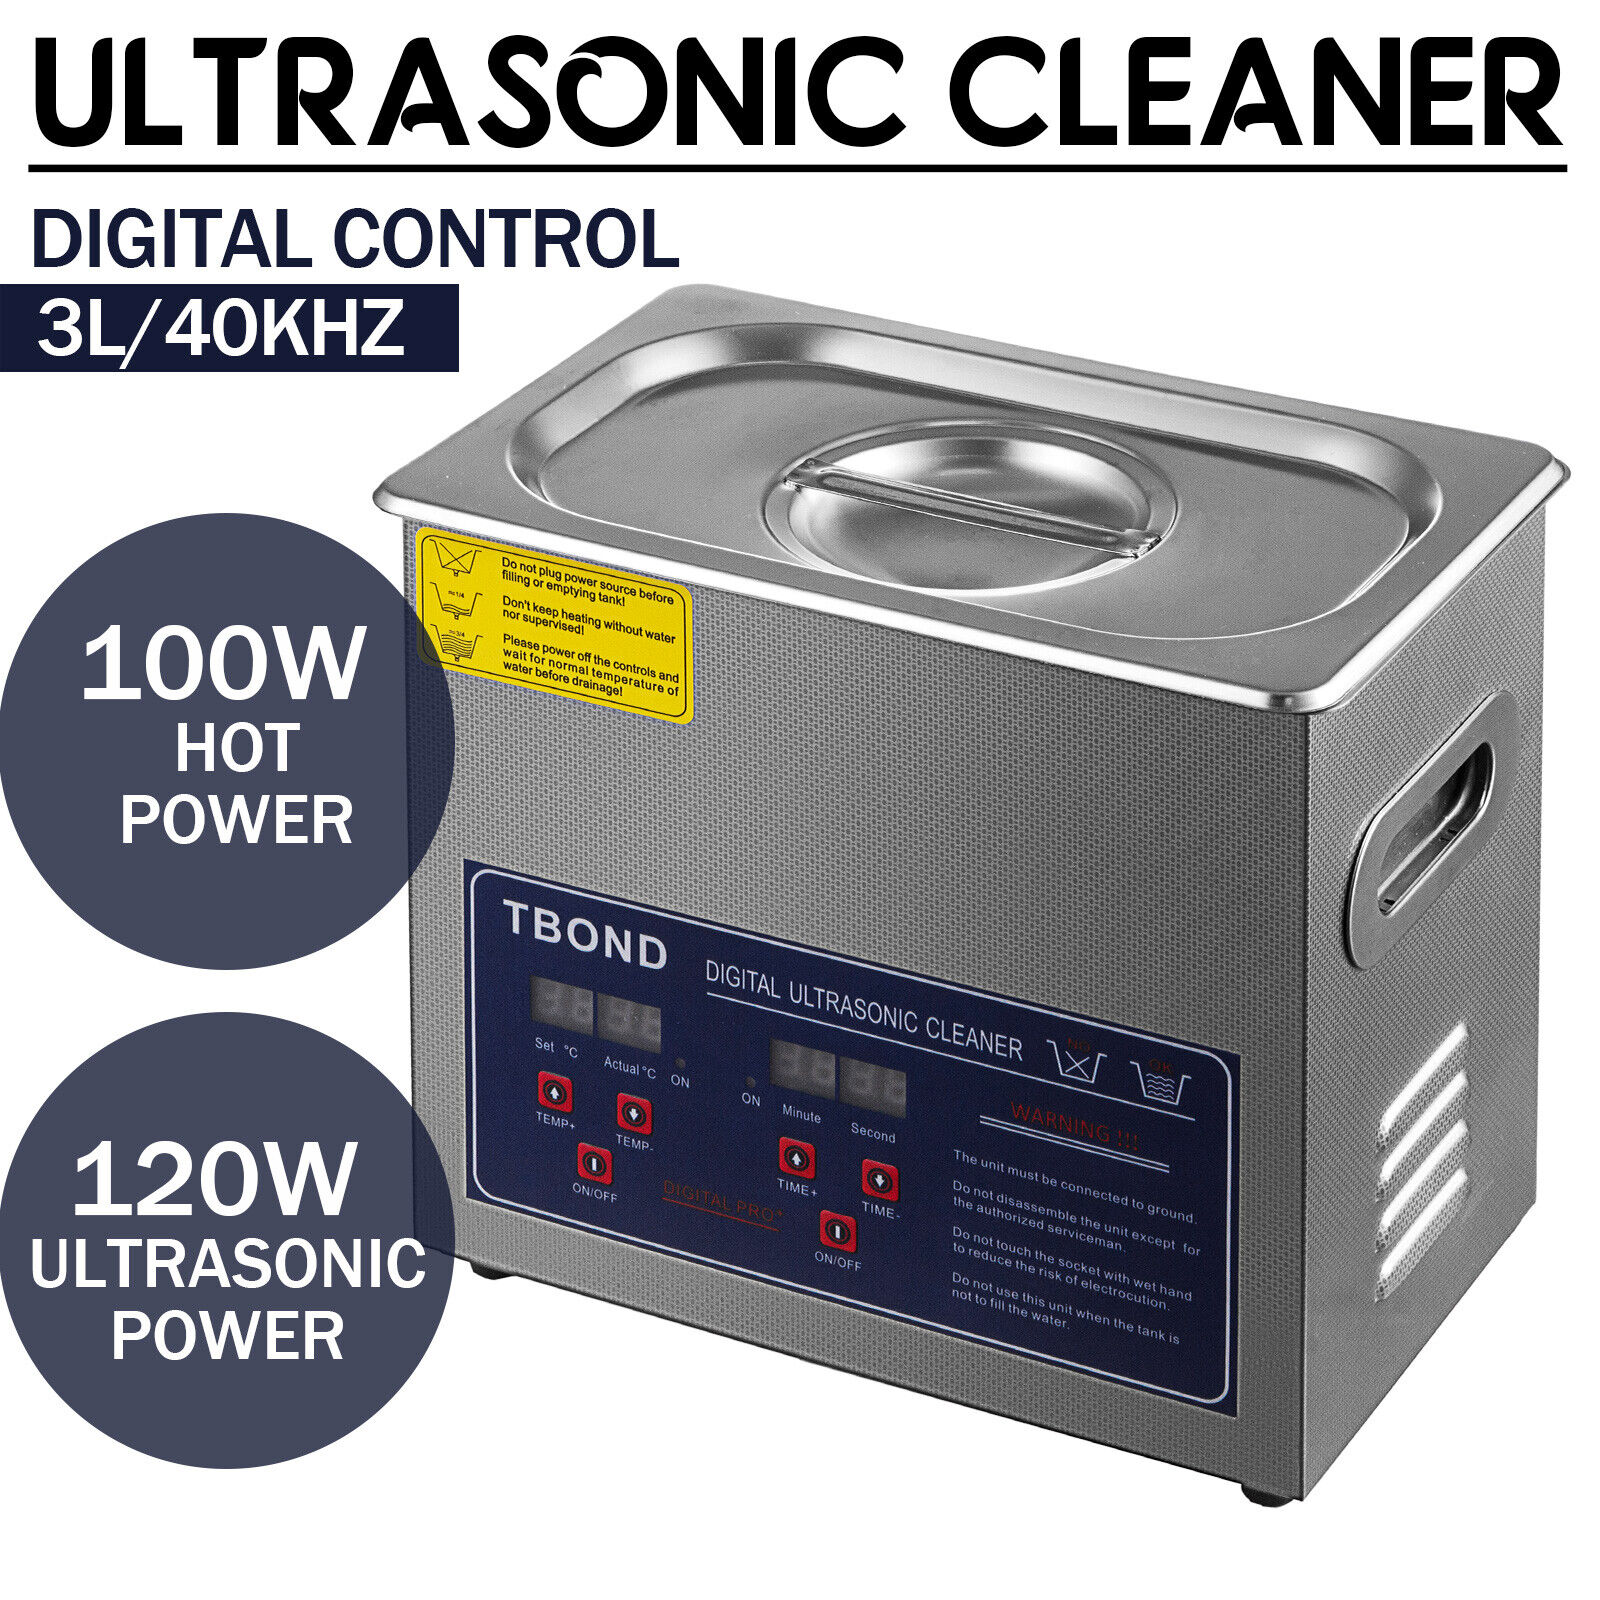 30L Ultrasonic Cleaner Cleaning Equipment Liter Industry Heated W/ Timer